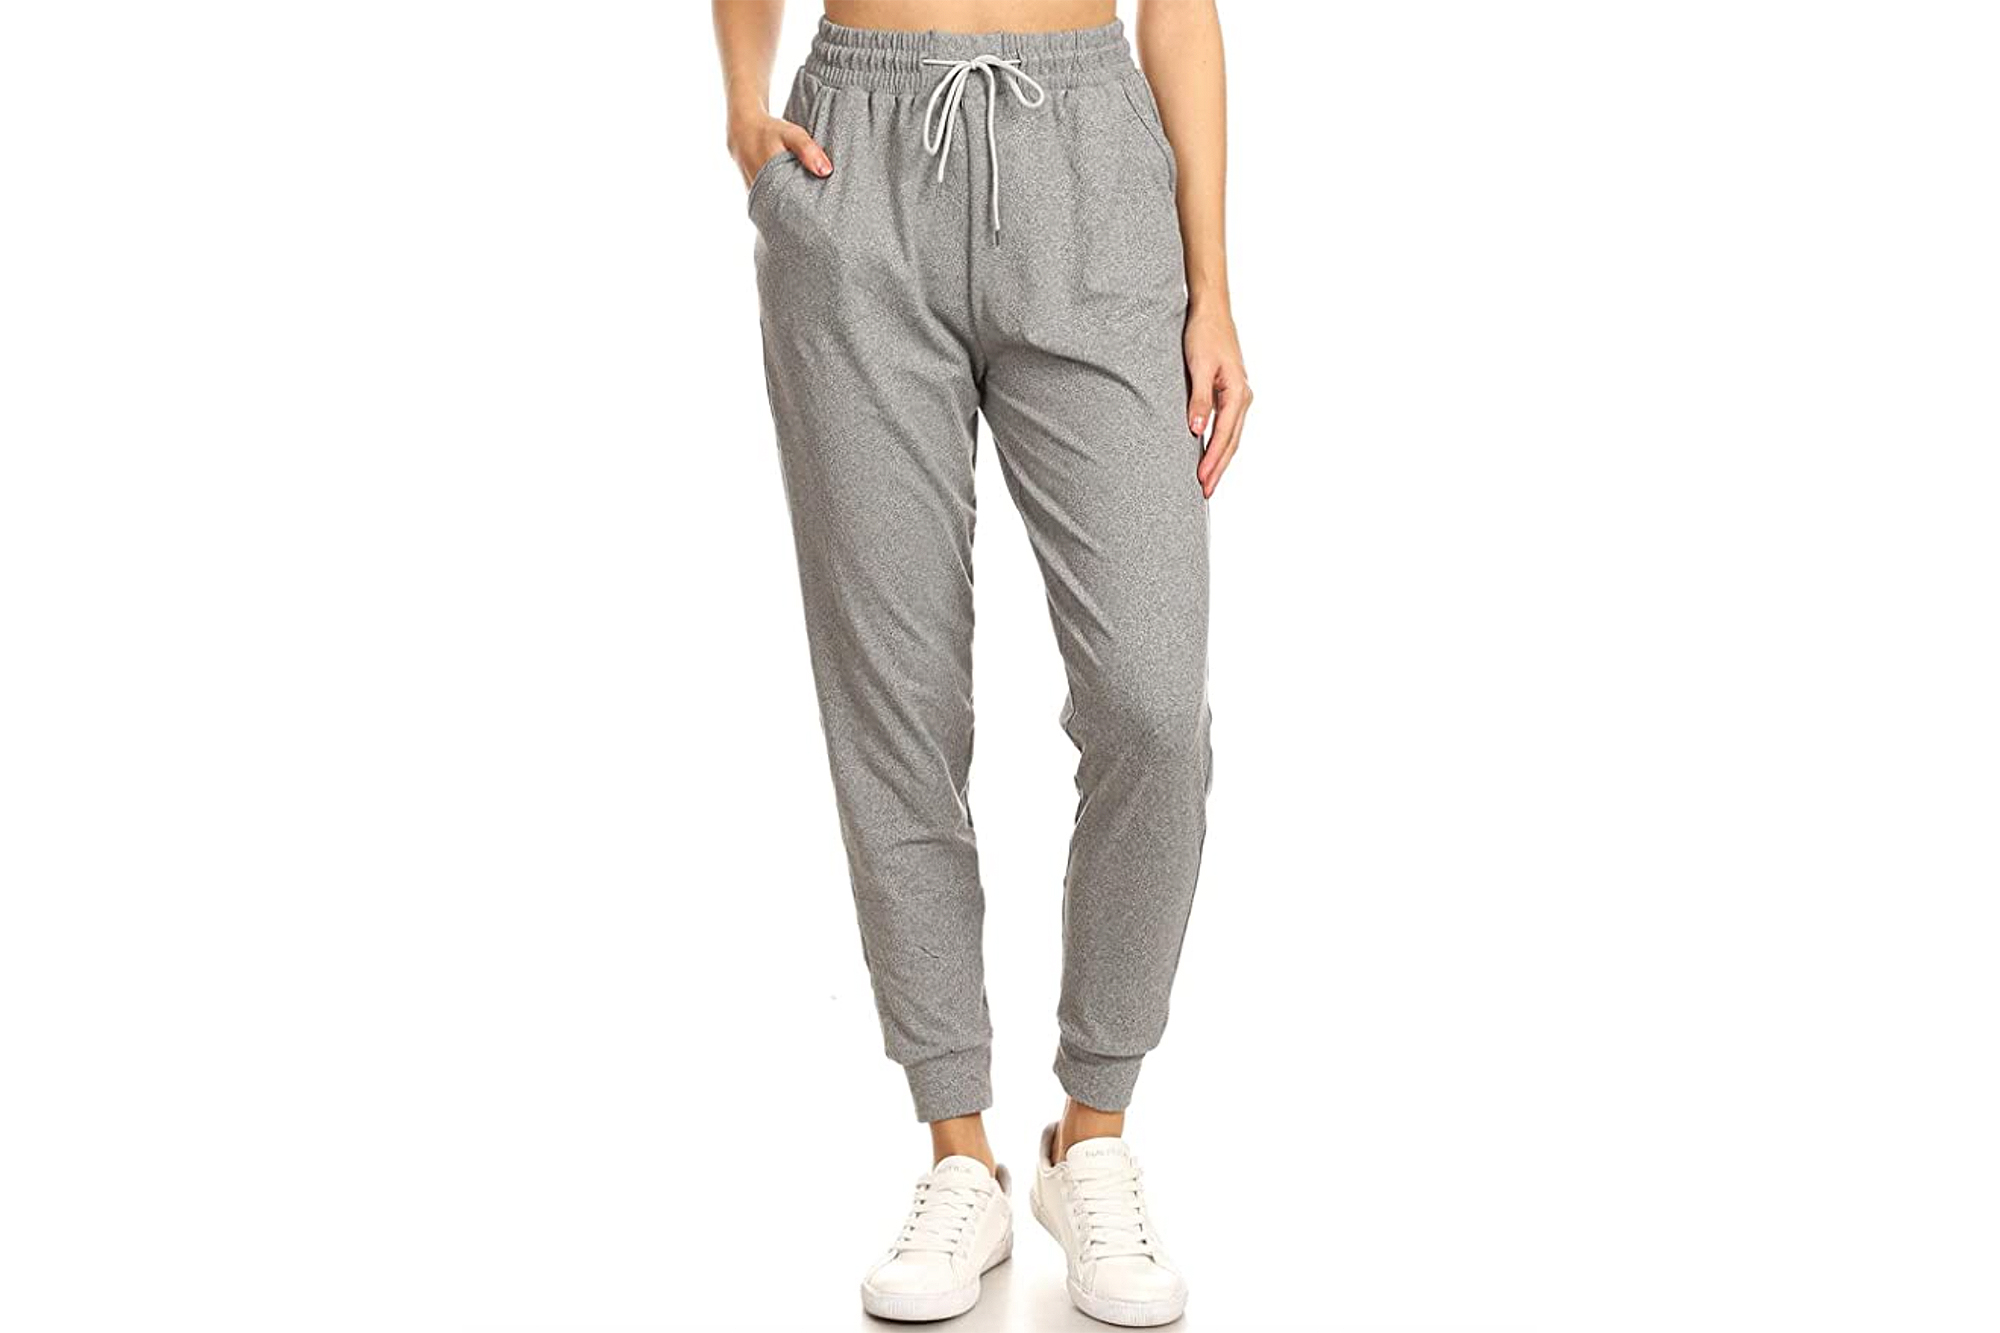 Leggings Depot Joggers Are Seriously Popular on